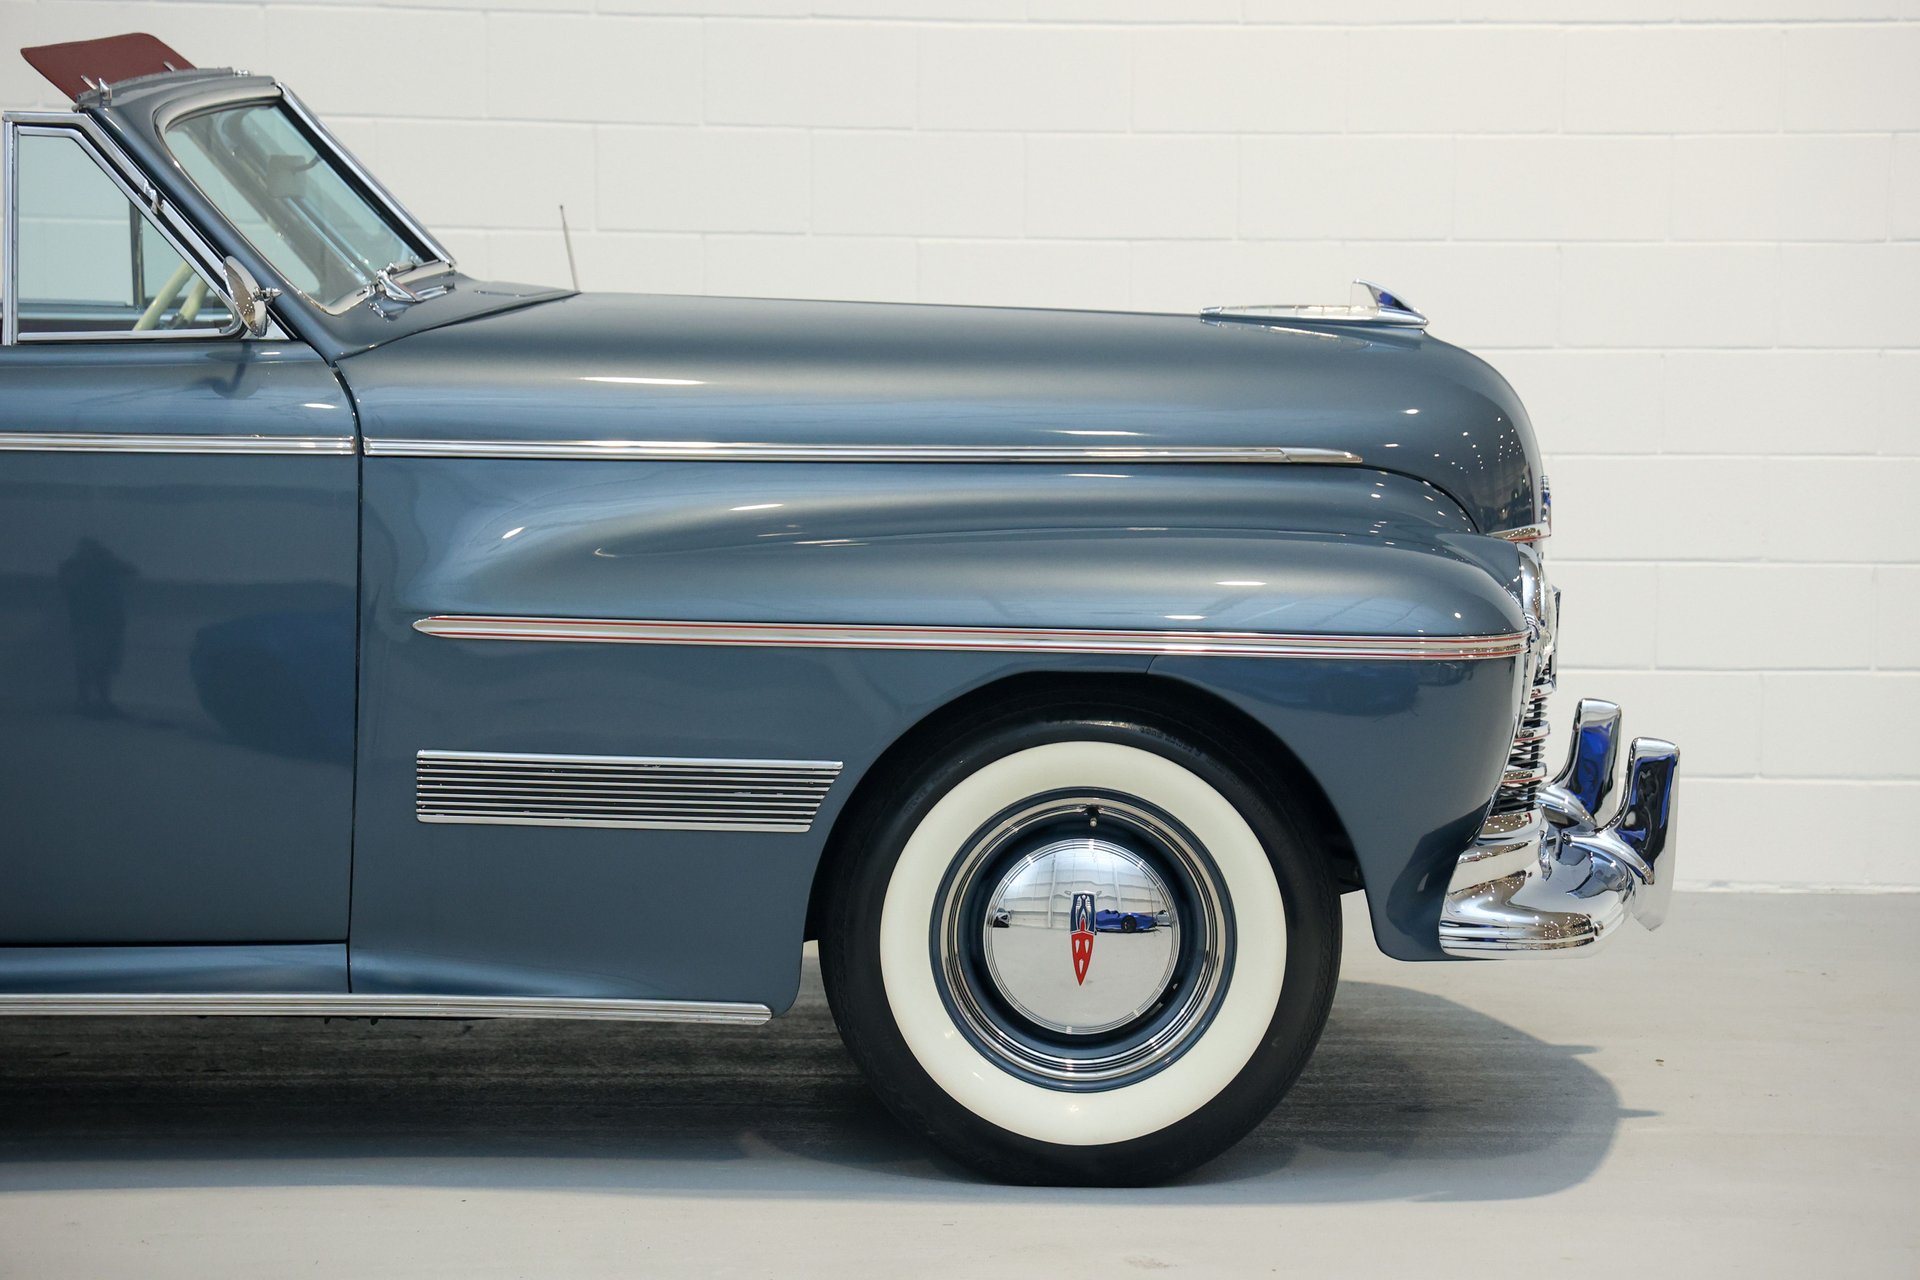 Broad Arrow Auctions | 1941 Oldsmobile Custom Cruiser 98 Convertible Coupe